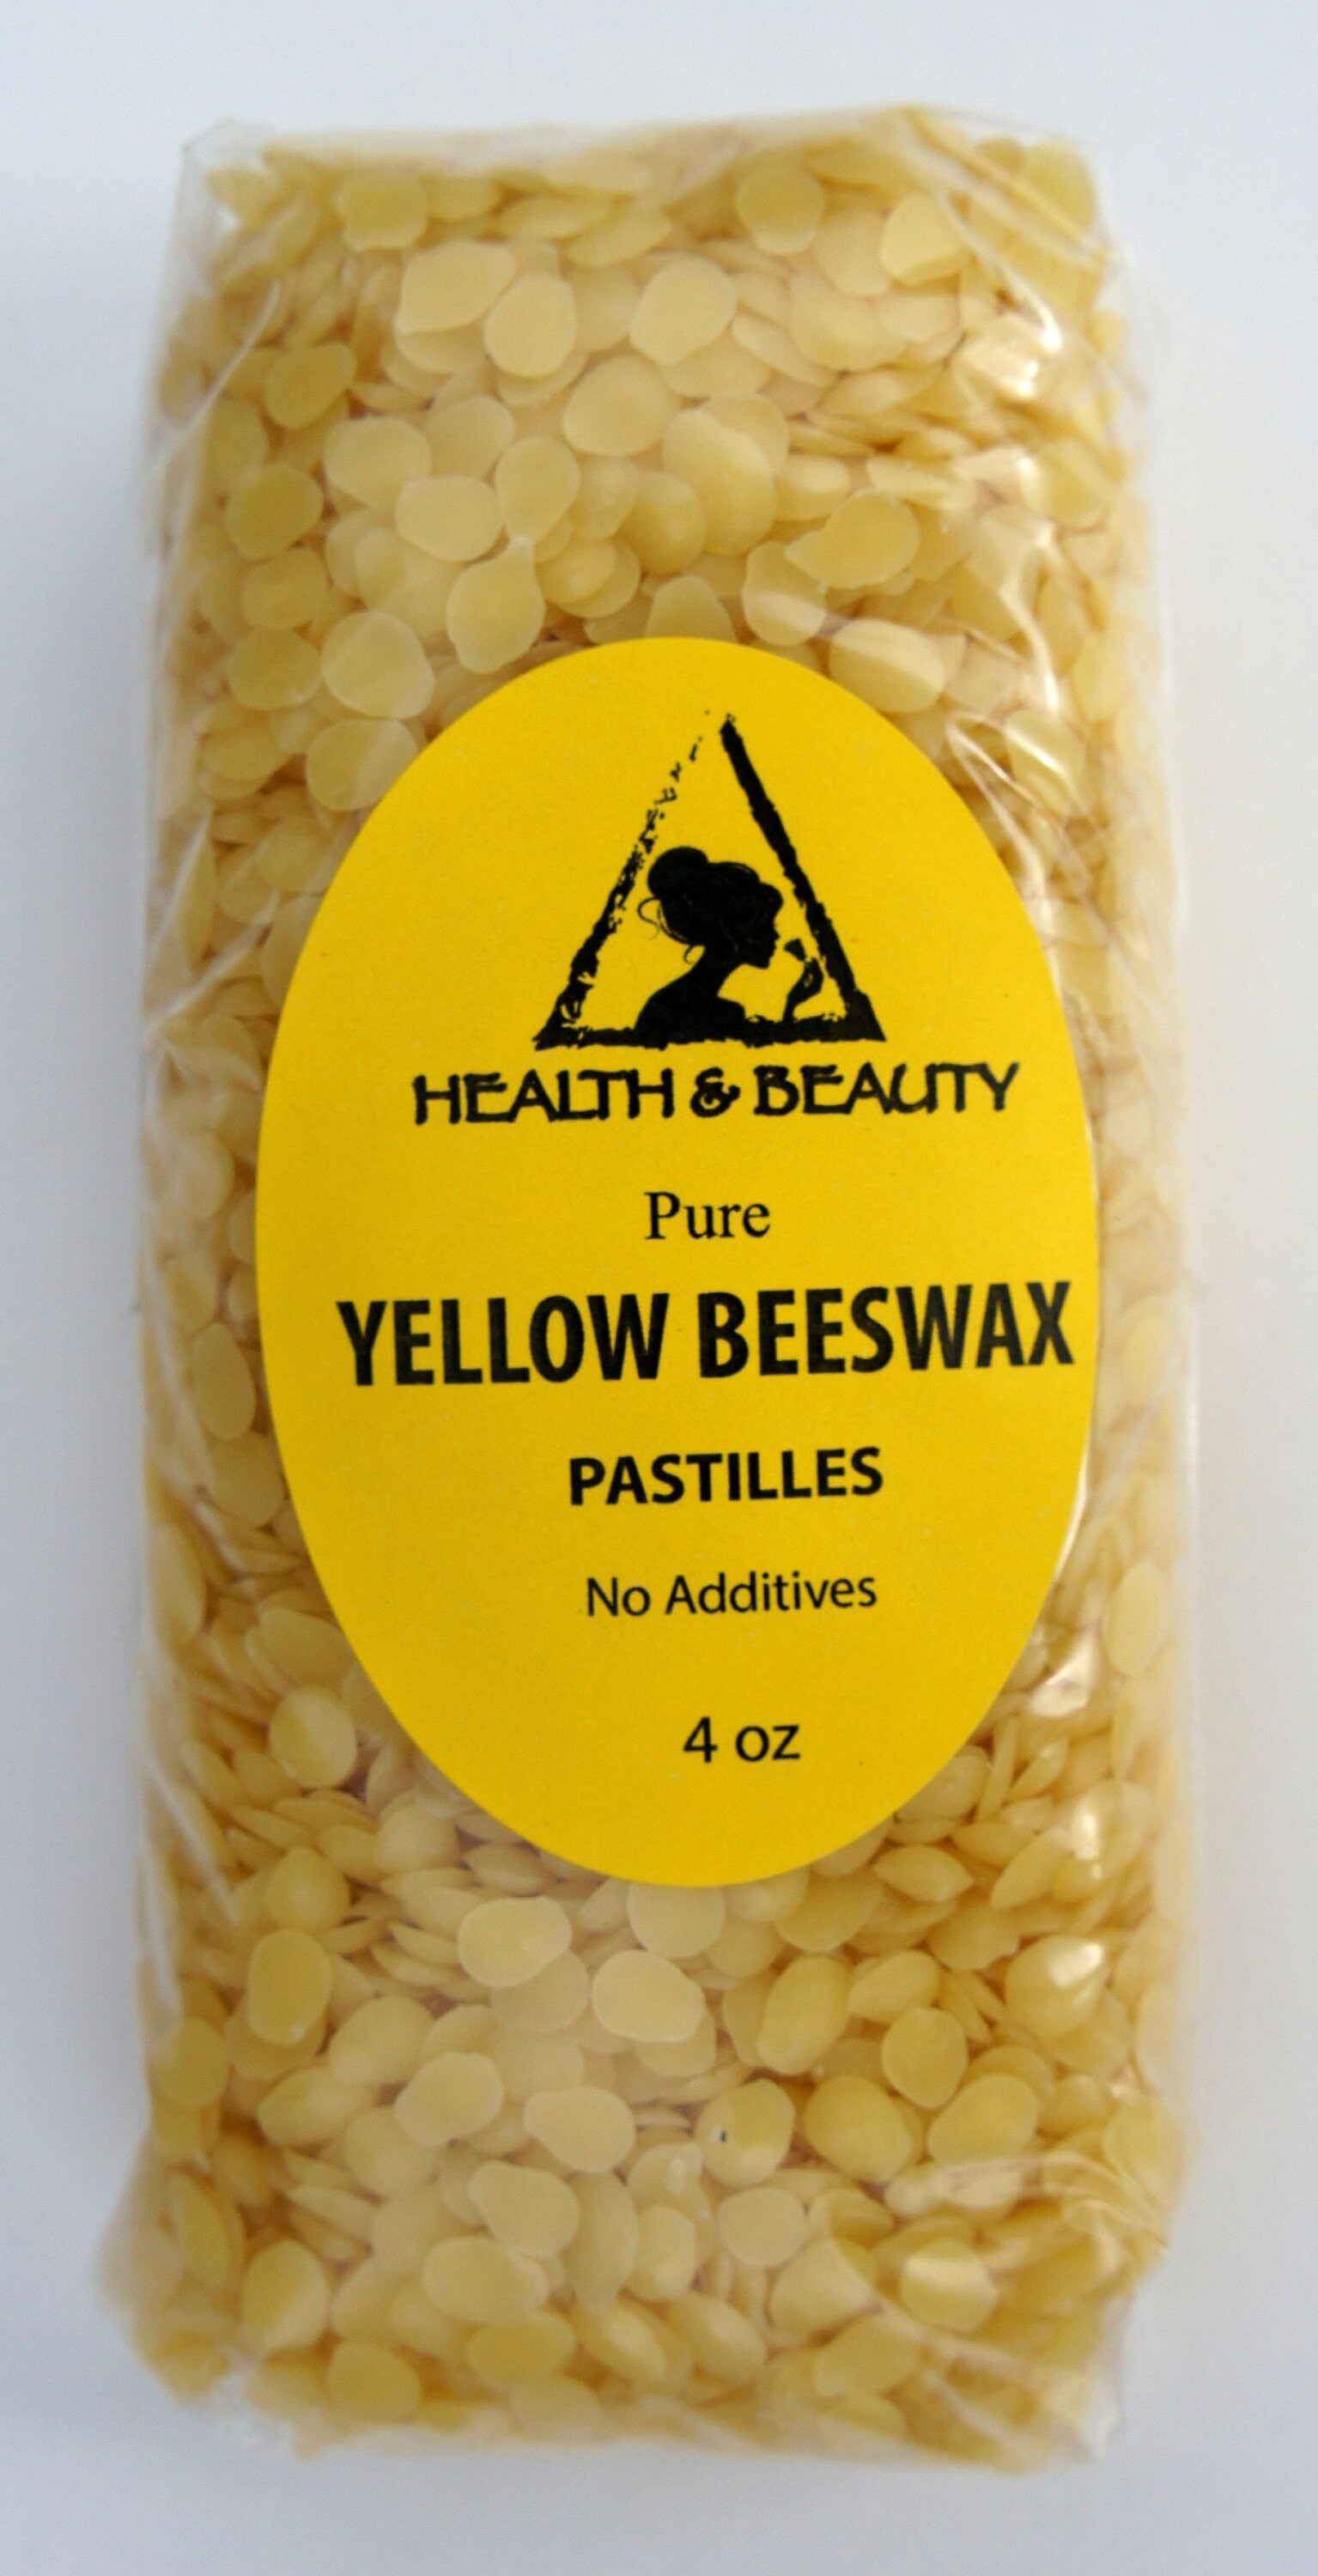 Organic Yellow Beeswax Pellets 1 lb, Pure, Natural, Cosmetic Grade Bees  Wax, Triple Filtered, Great for Diy Lip Balm, Food Wrap, Lotions